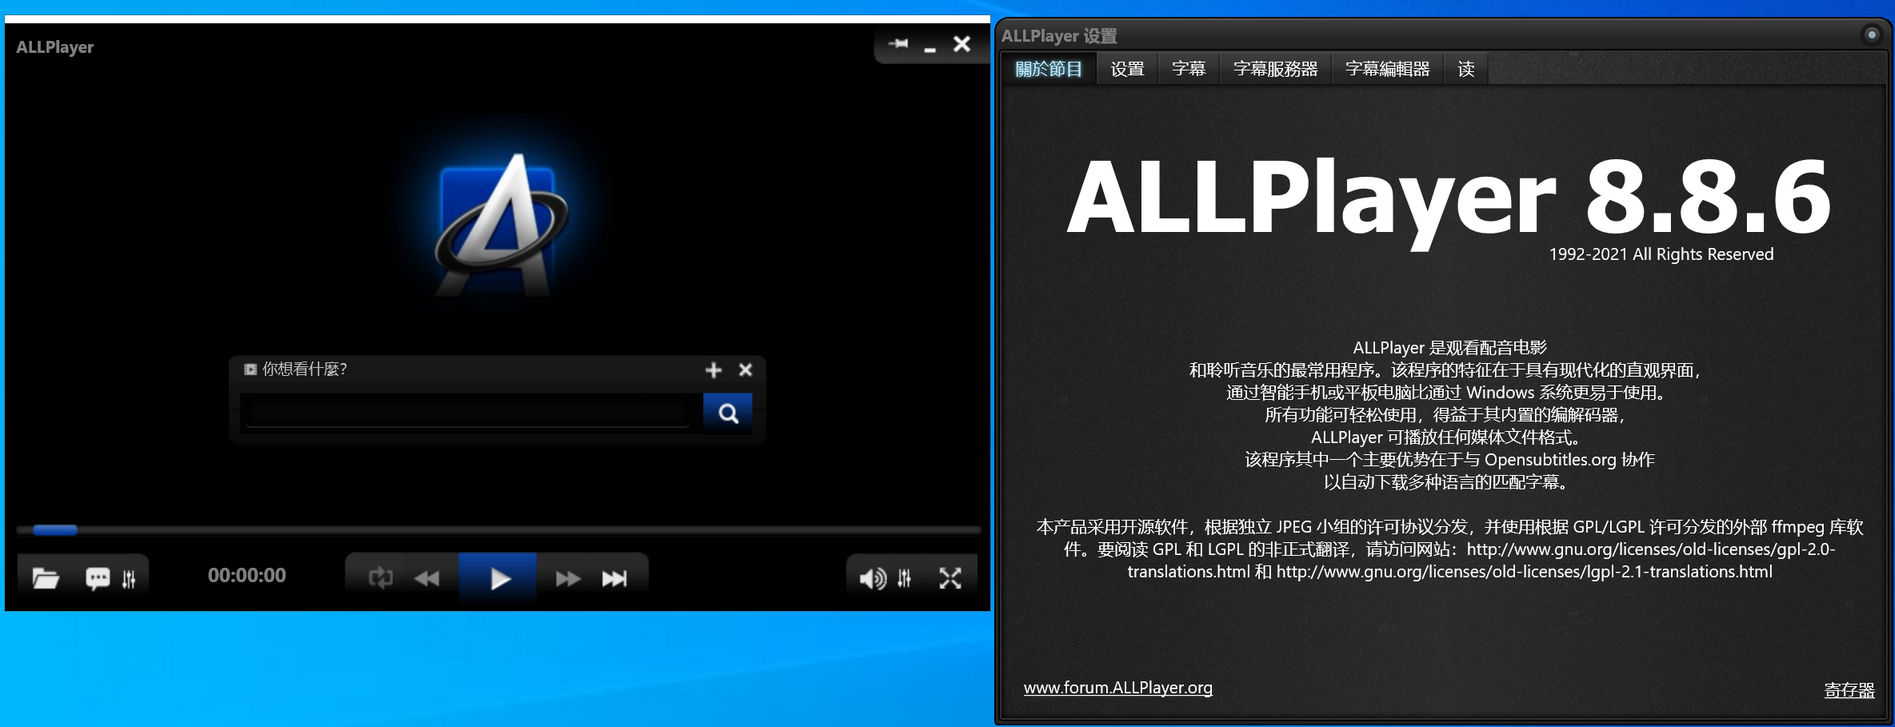 ALLPlayer 8.9.6 download the new version for mac